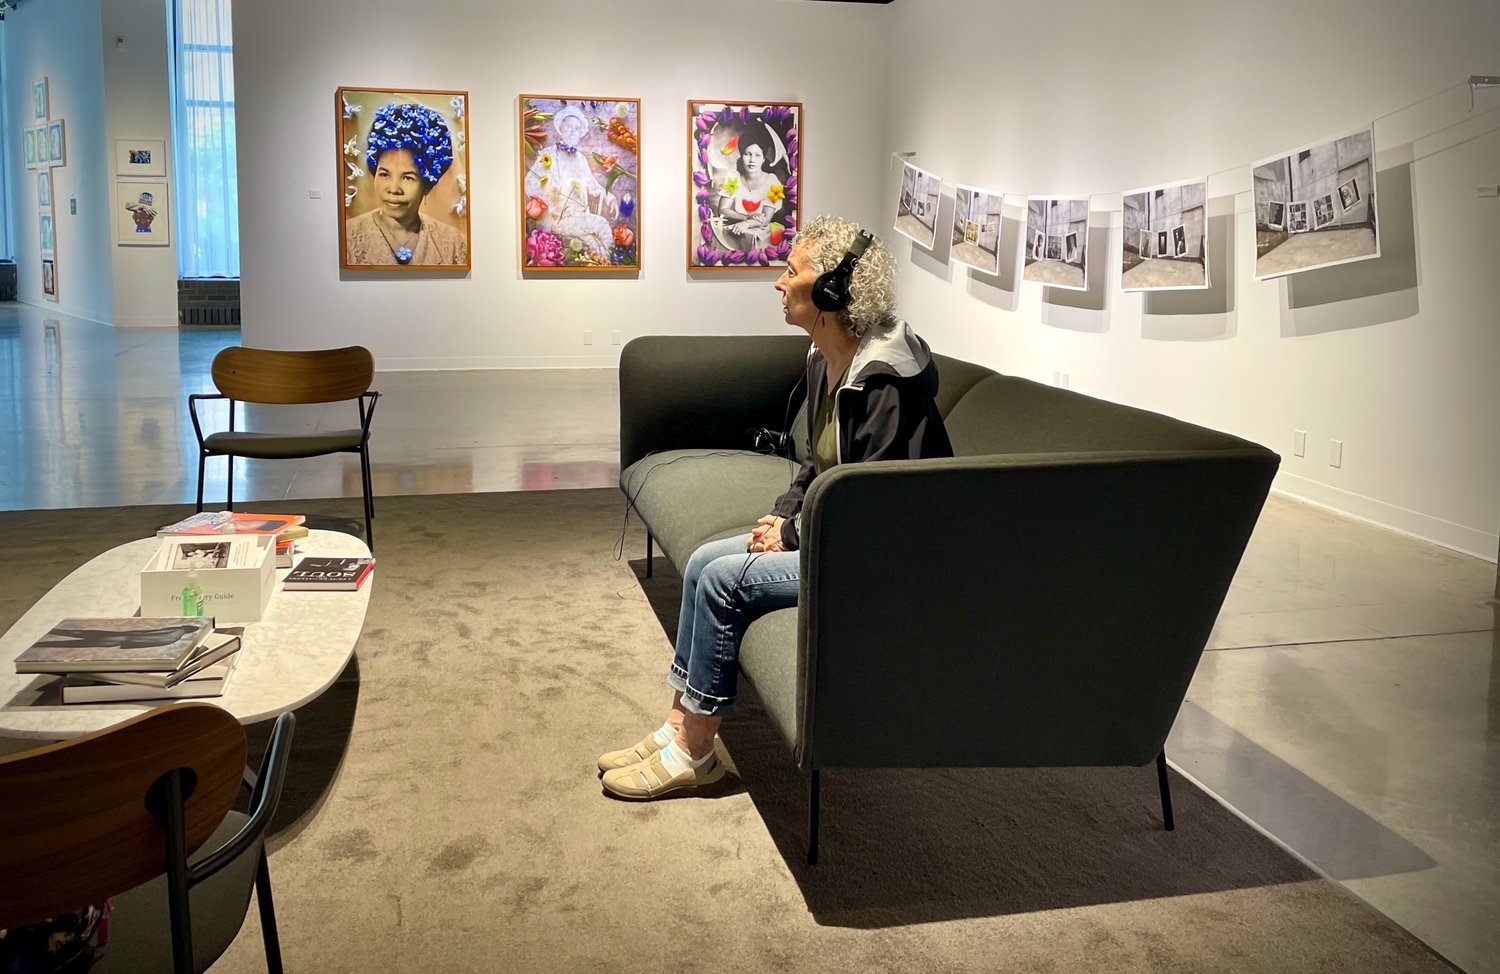 St. Paul resident, Robin Warshaw, enjoys the soundscape of "A Picture Gallery of the Soul" exhibit at the Katherine E. Nash Gallery on the University of Minnesota Campus West Bank. It runs through Dec. 10 and is free. (Photo by Susan Schaefer)